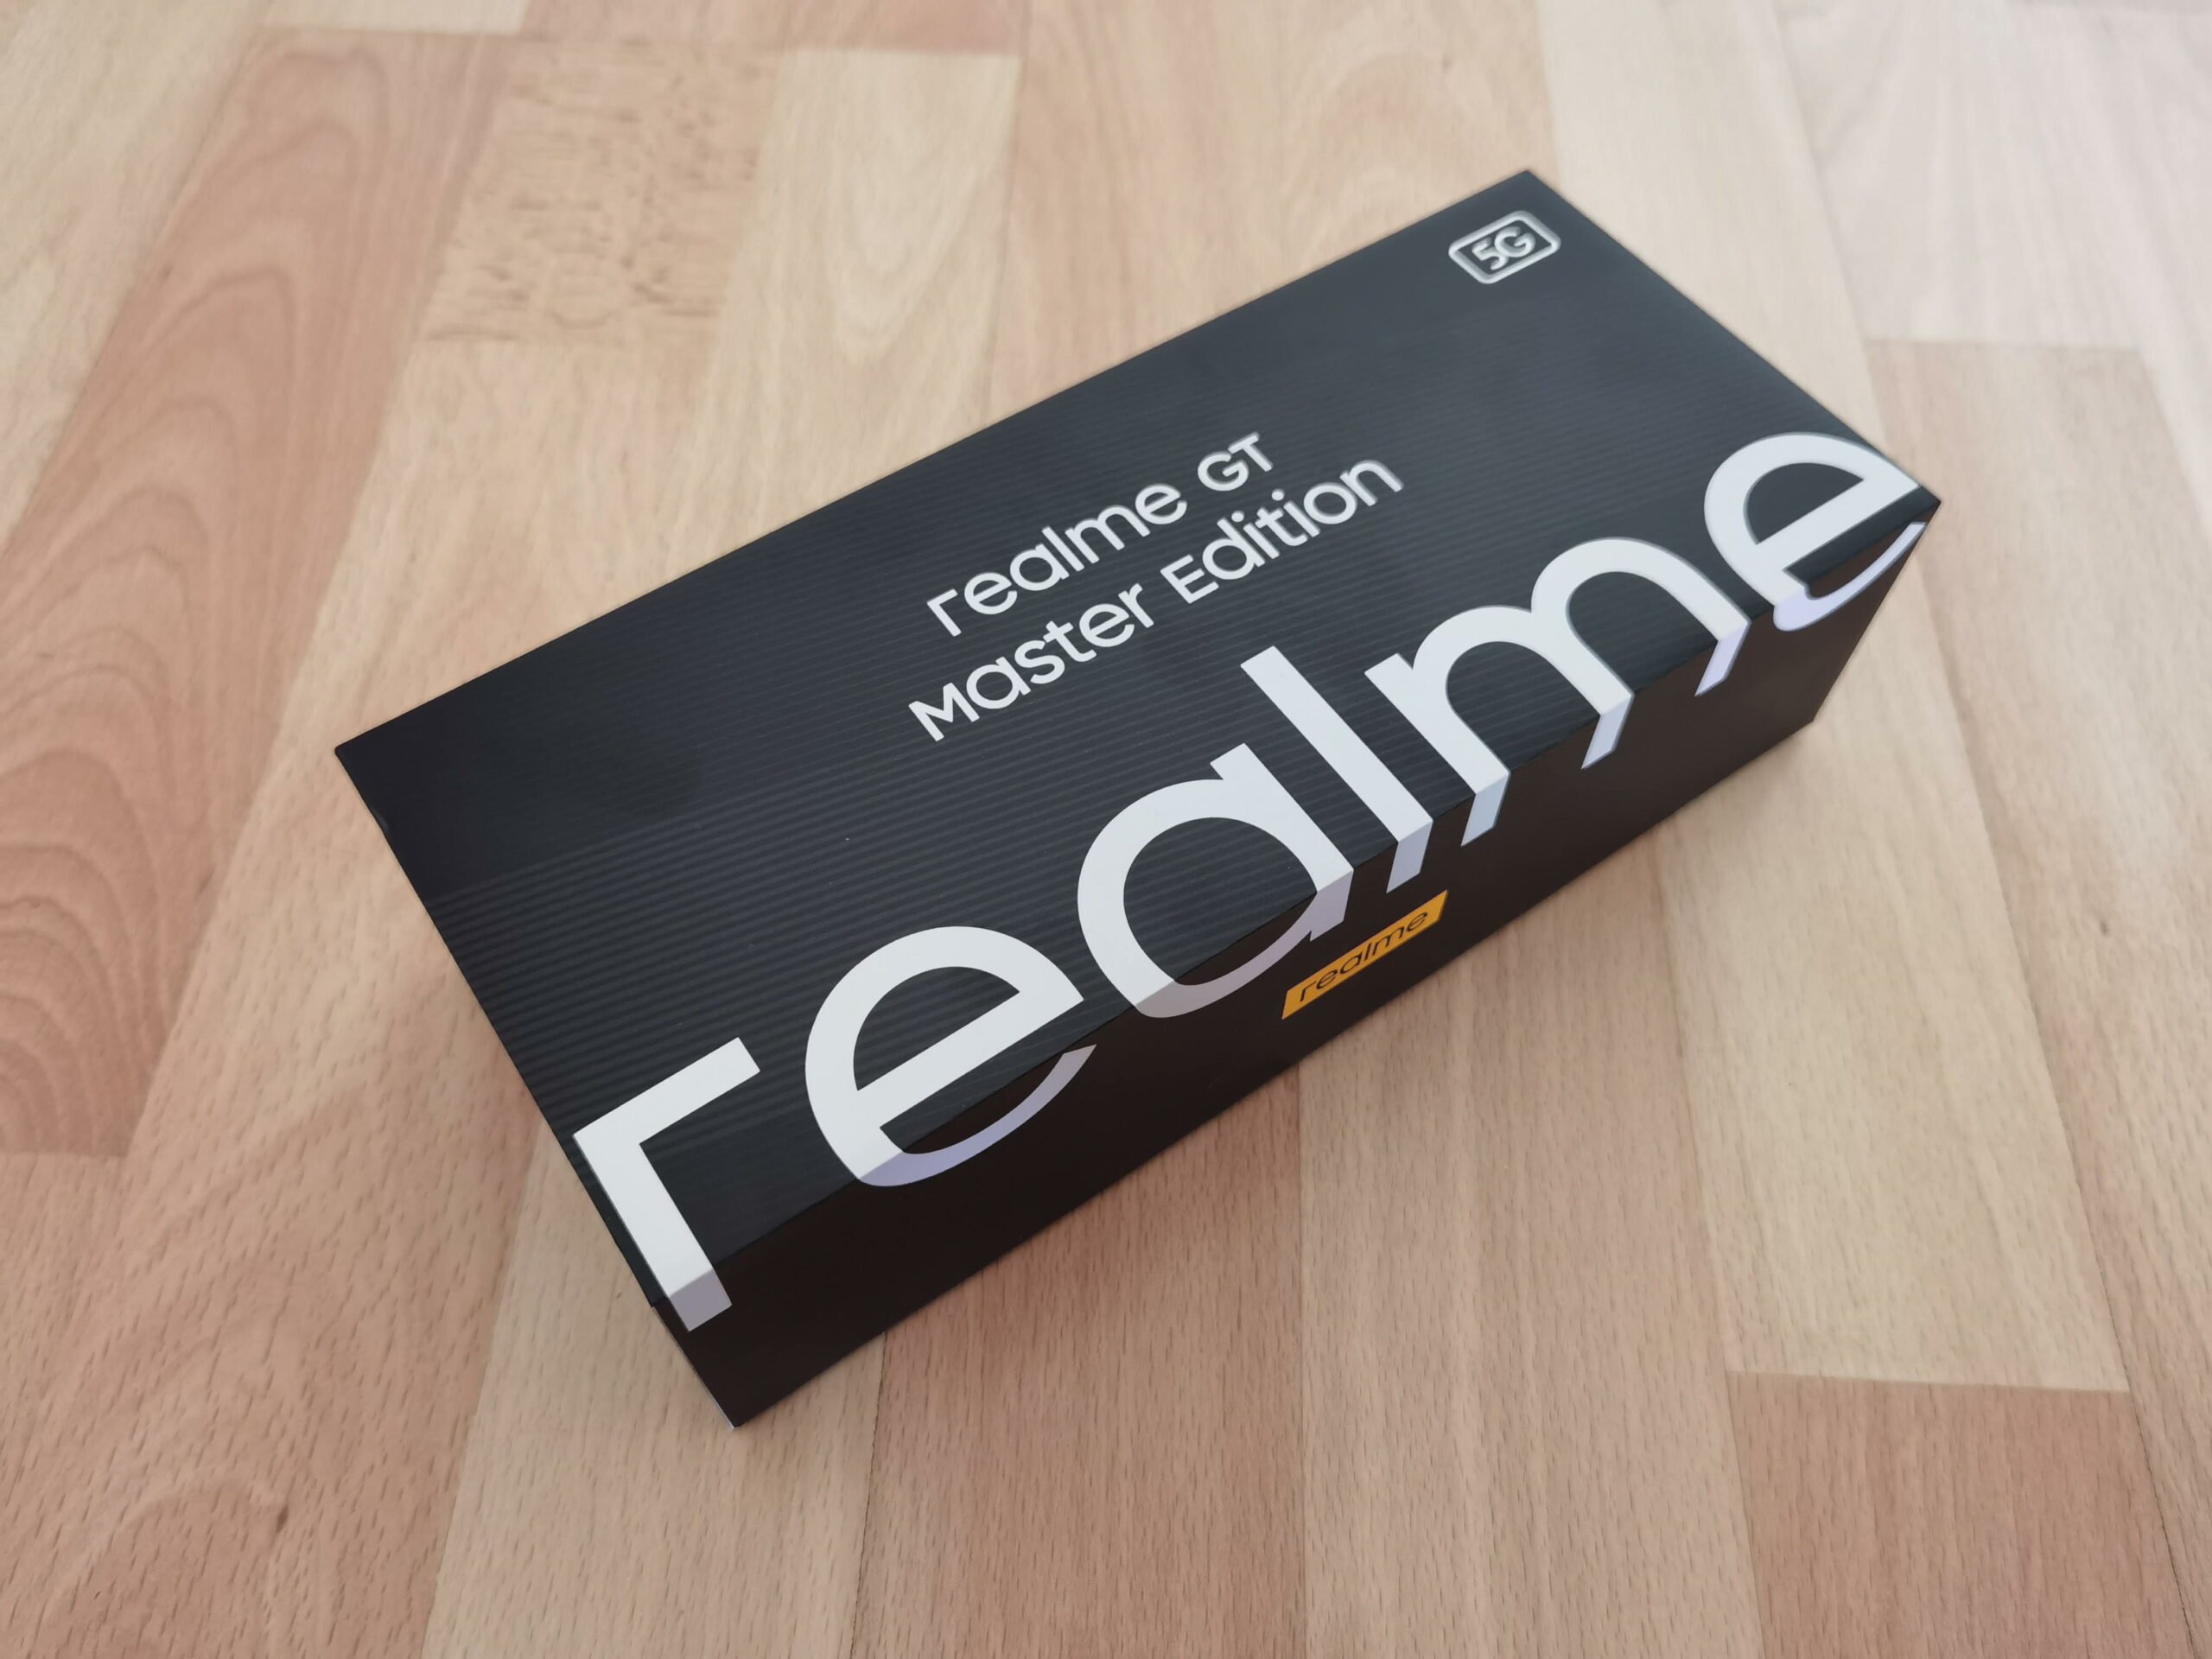 Realme GT Master Edition presented: specs, unboxing and first impression